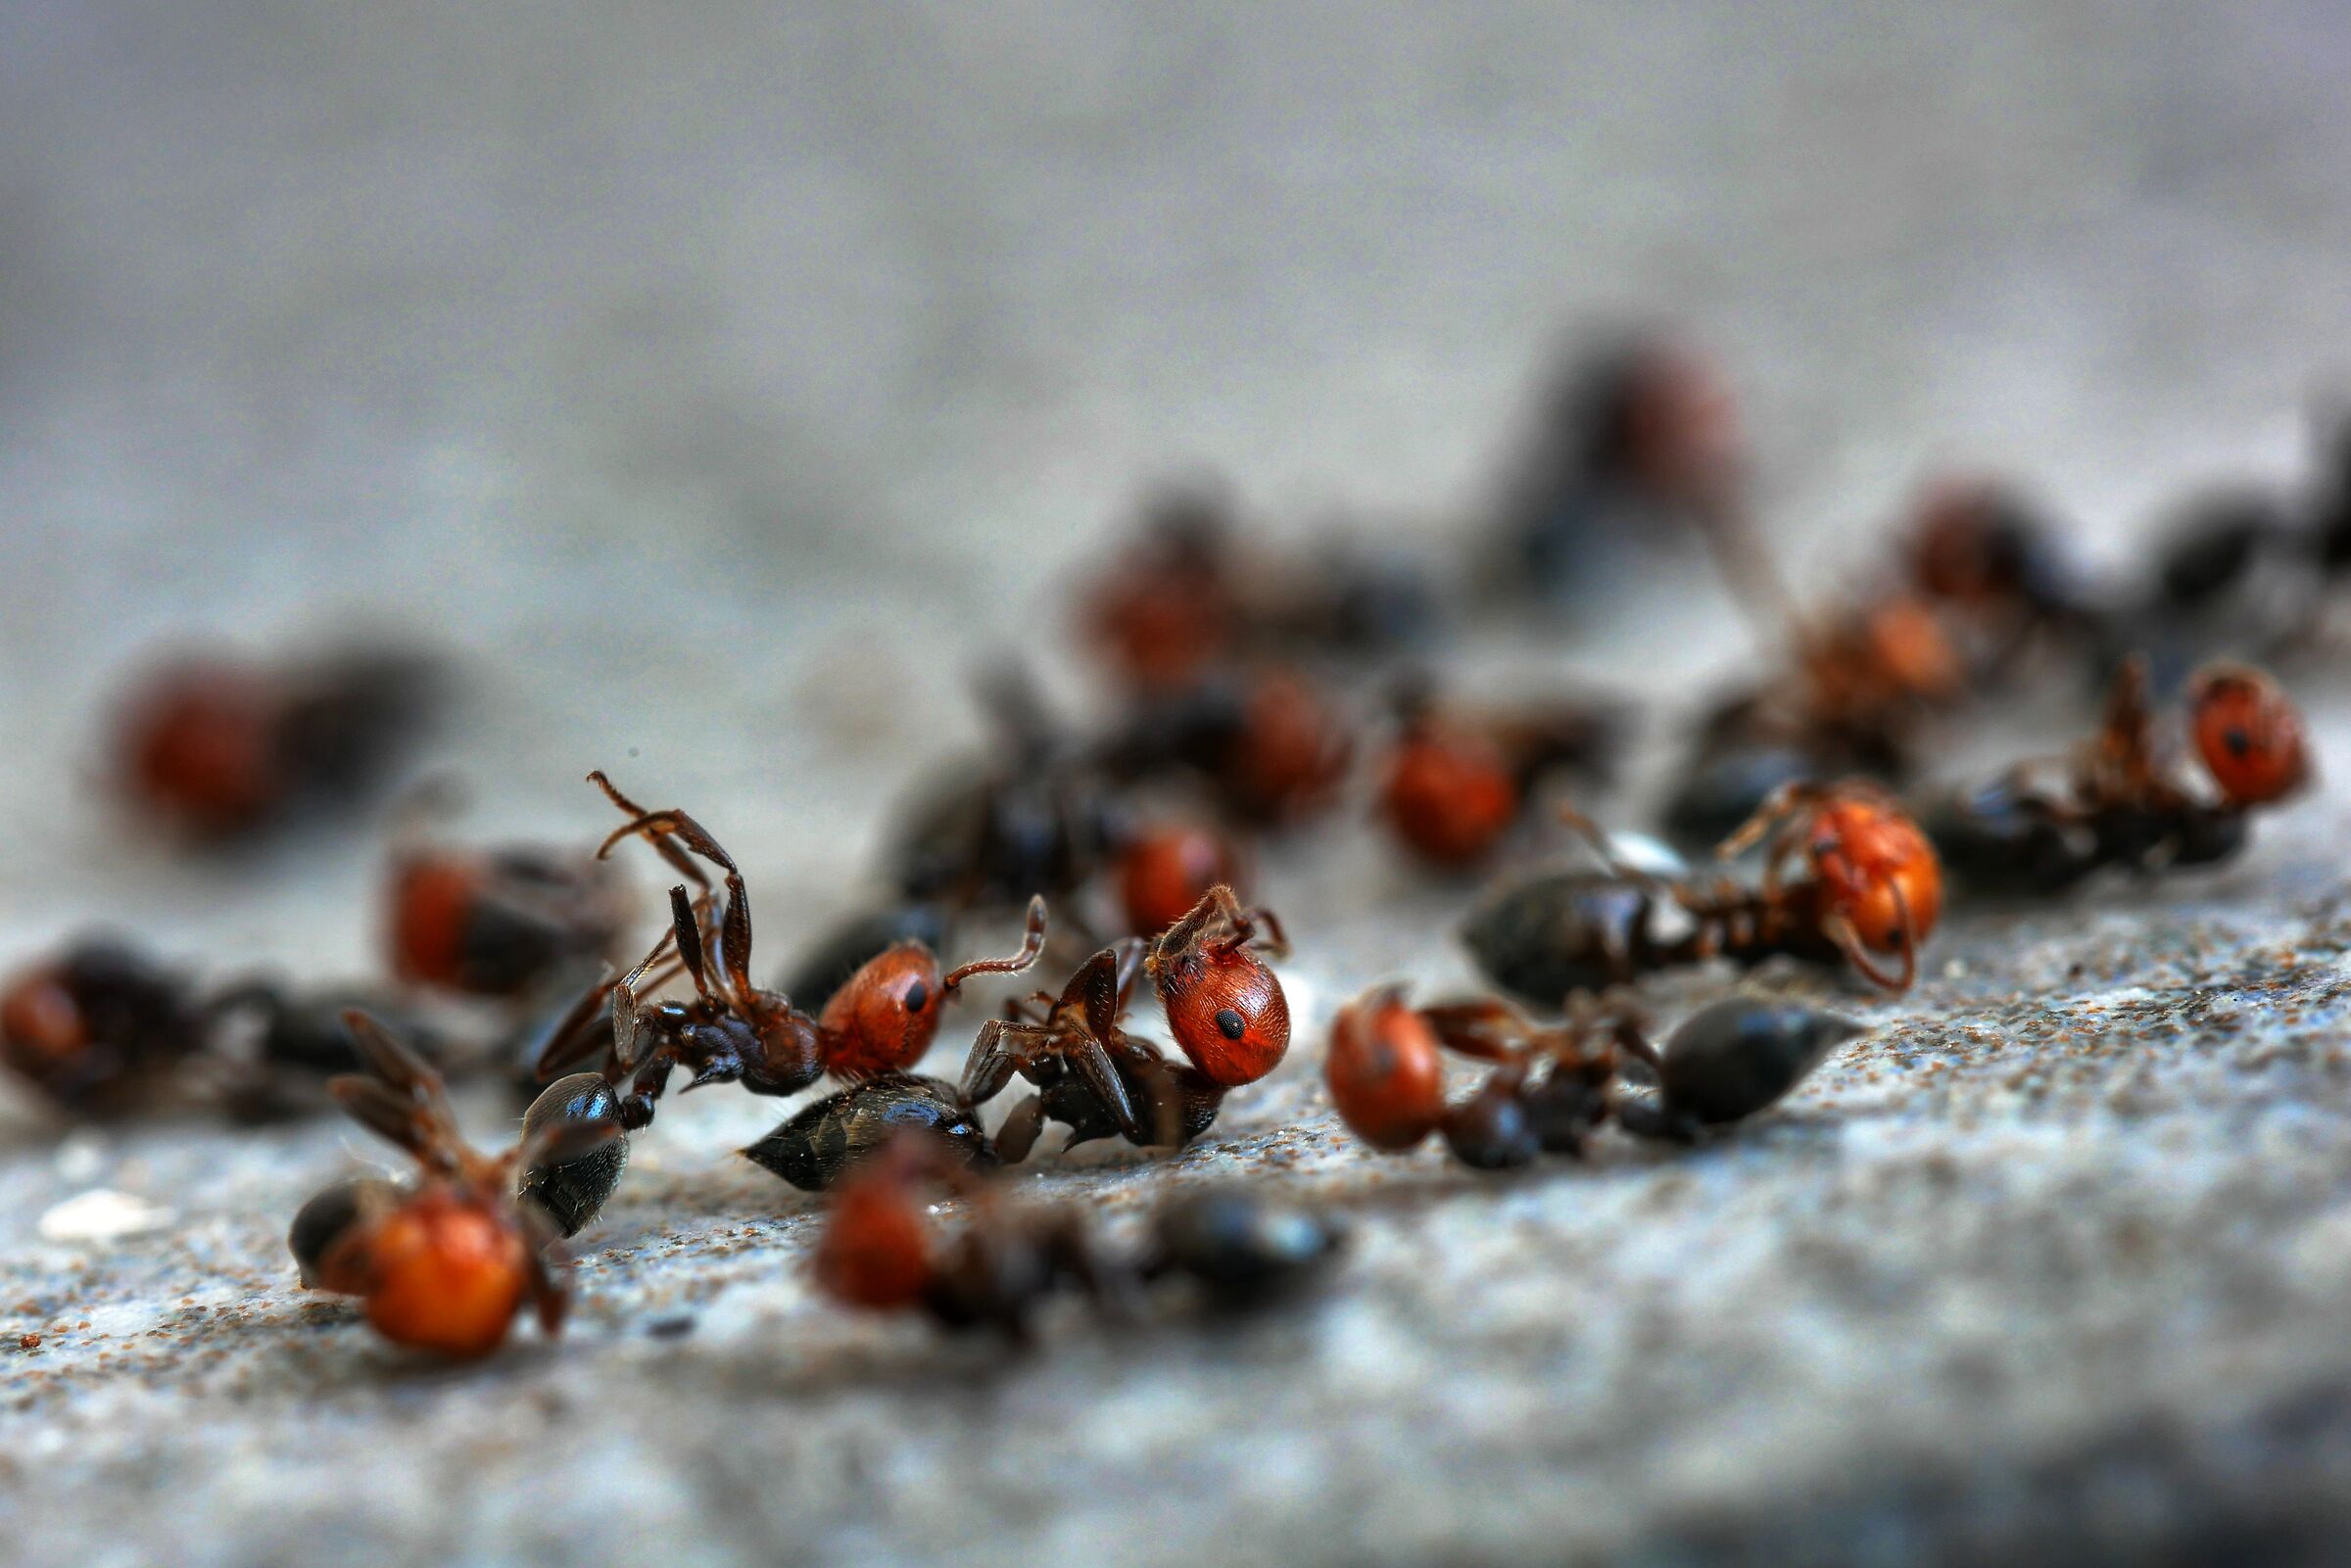 crematogaster workers...